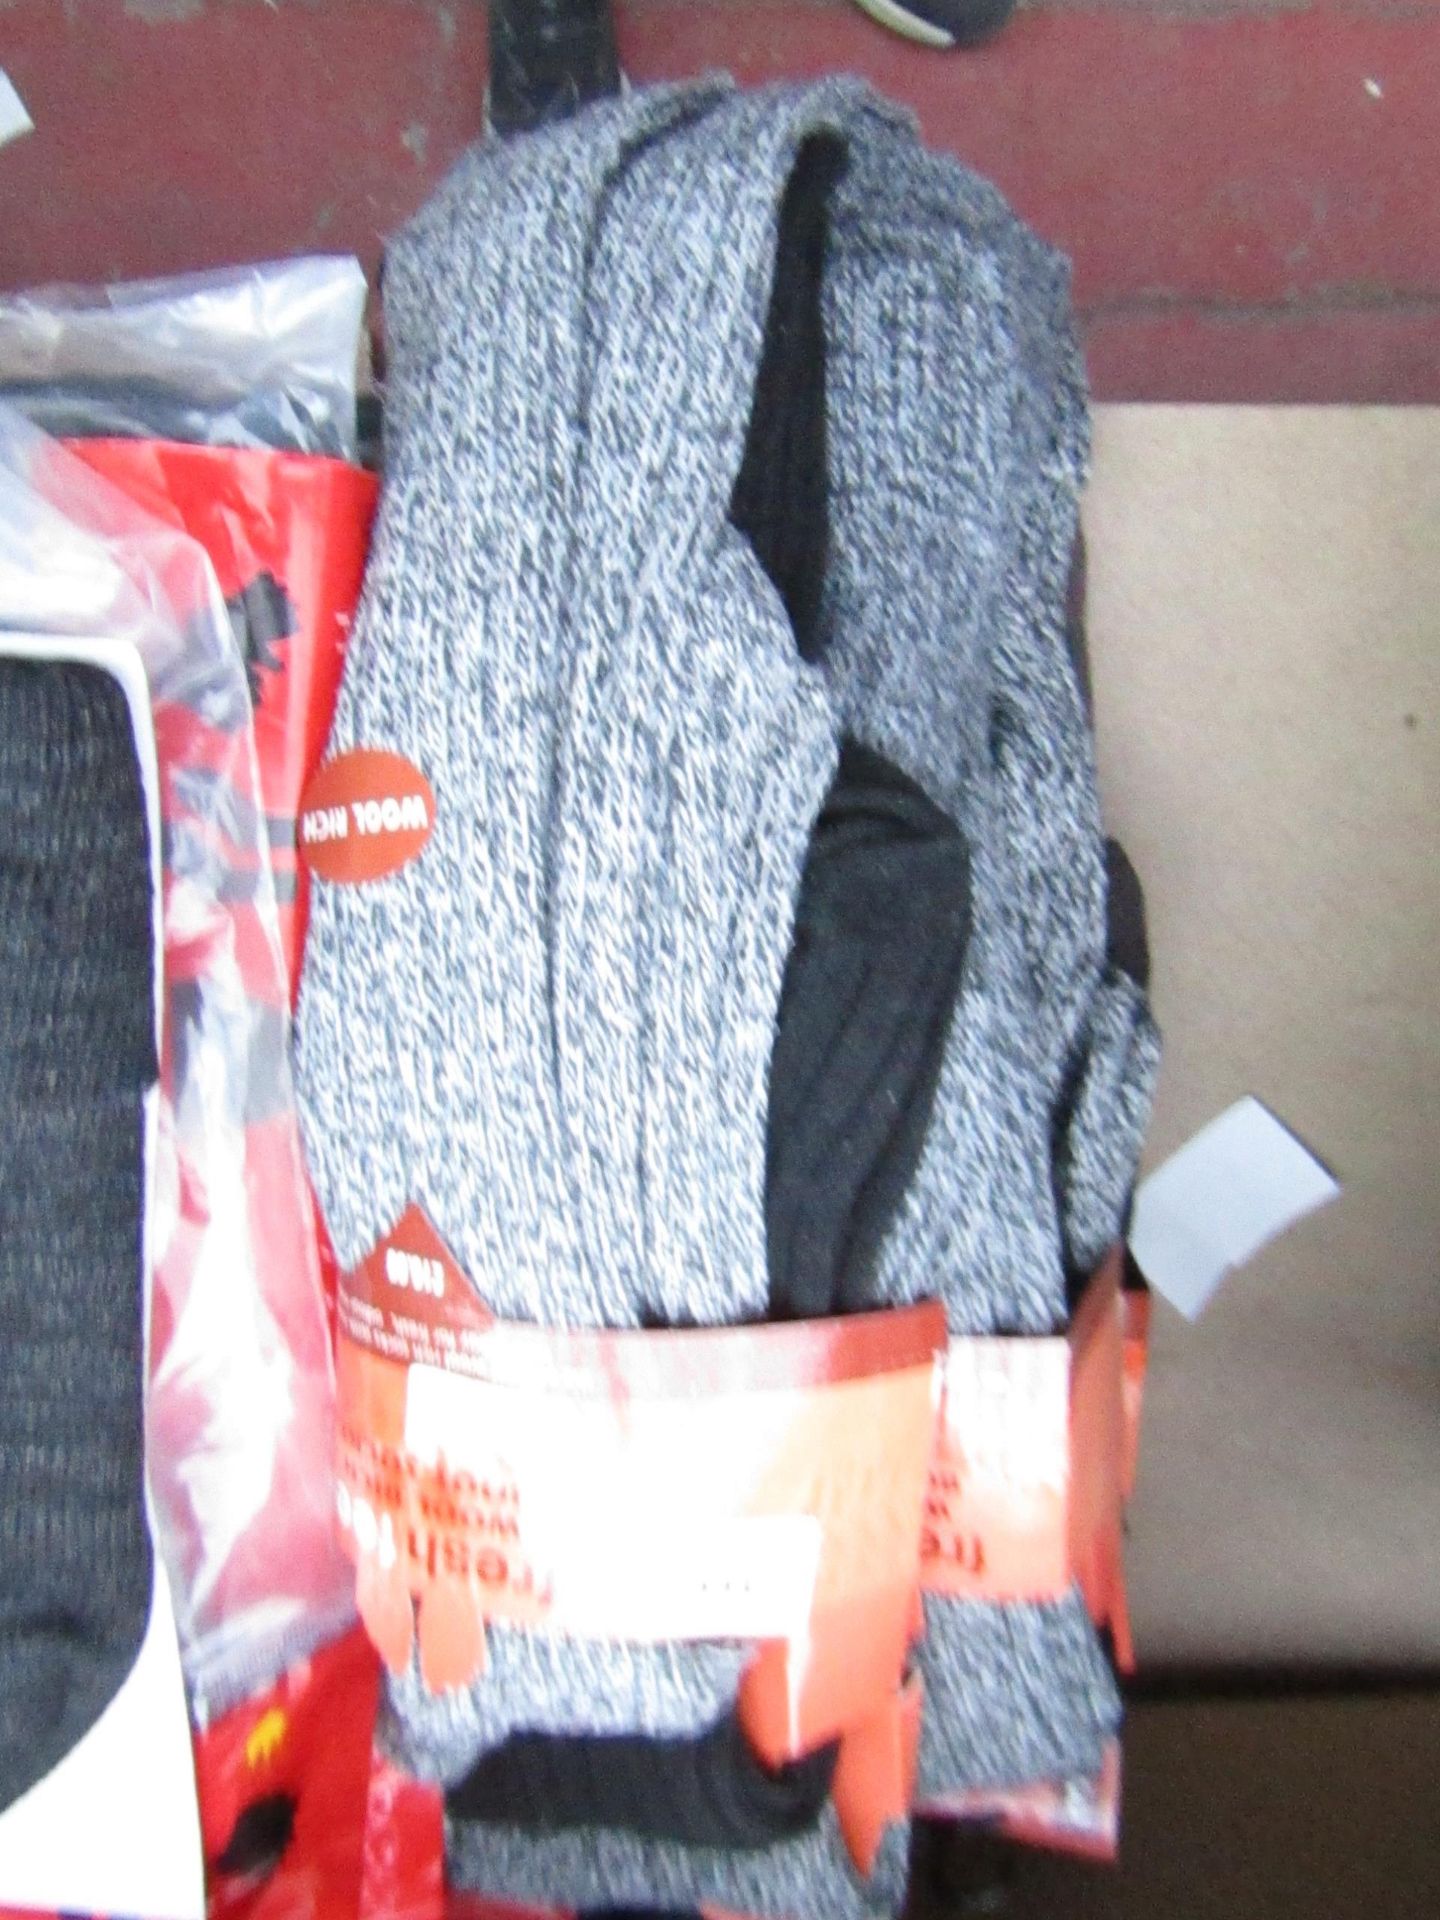 3x Pairs of Wool Socks socks, size 6-11, new and packaged.